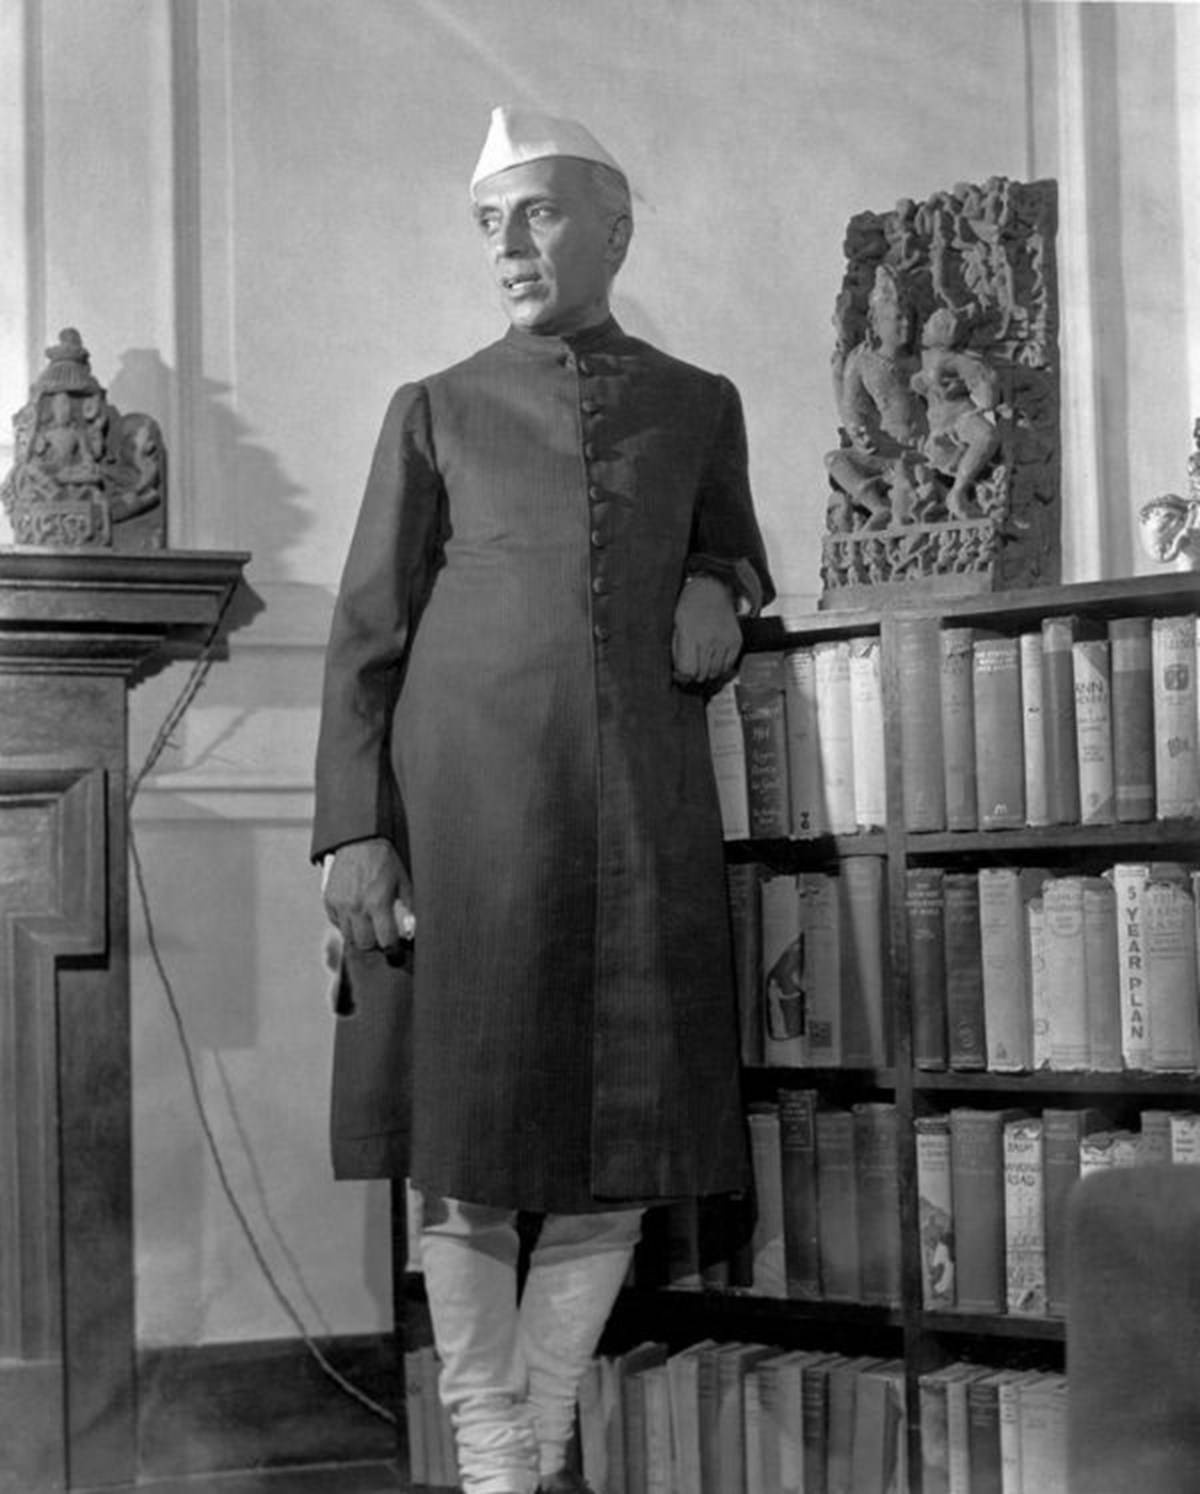 Jawaharlal Nehru, first president of India, chosen as the style icon.